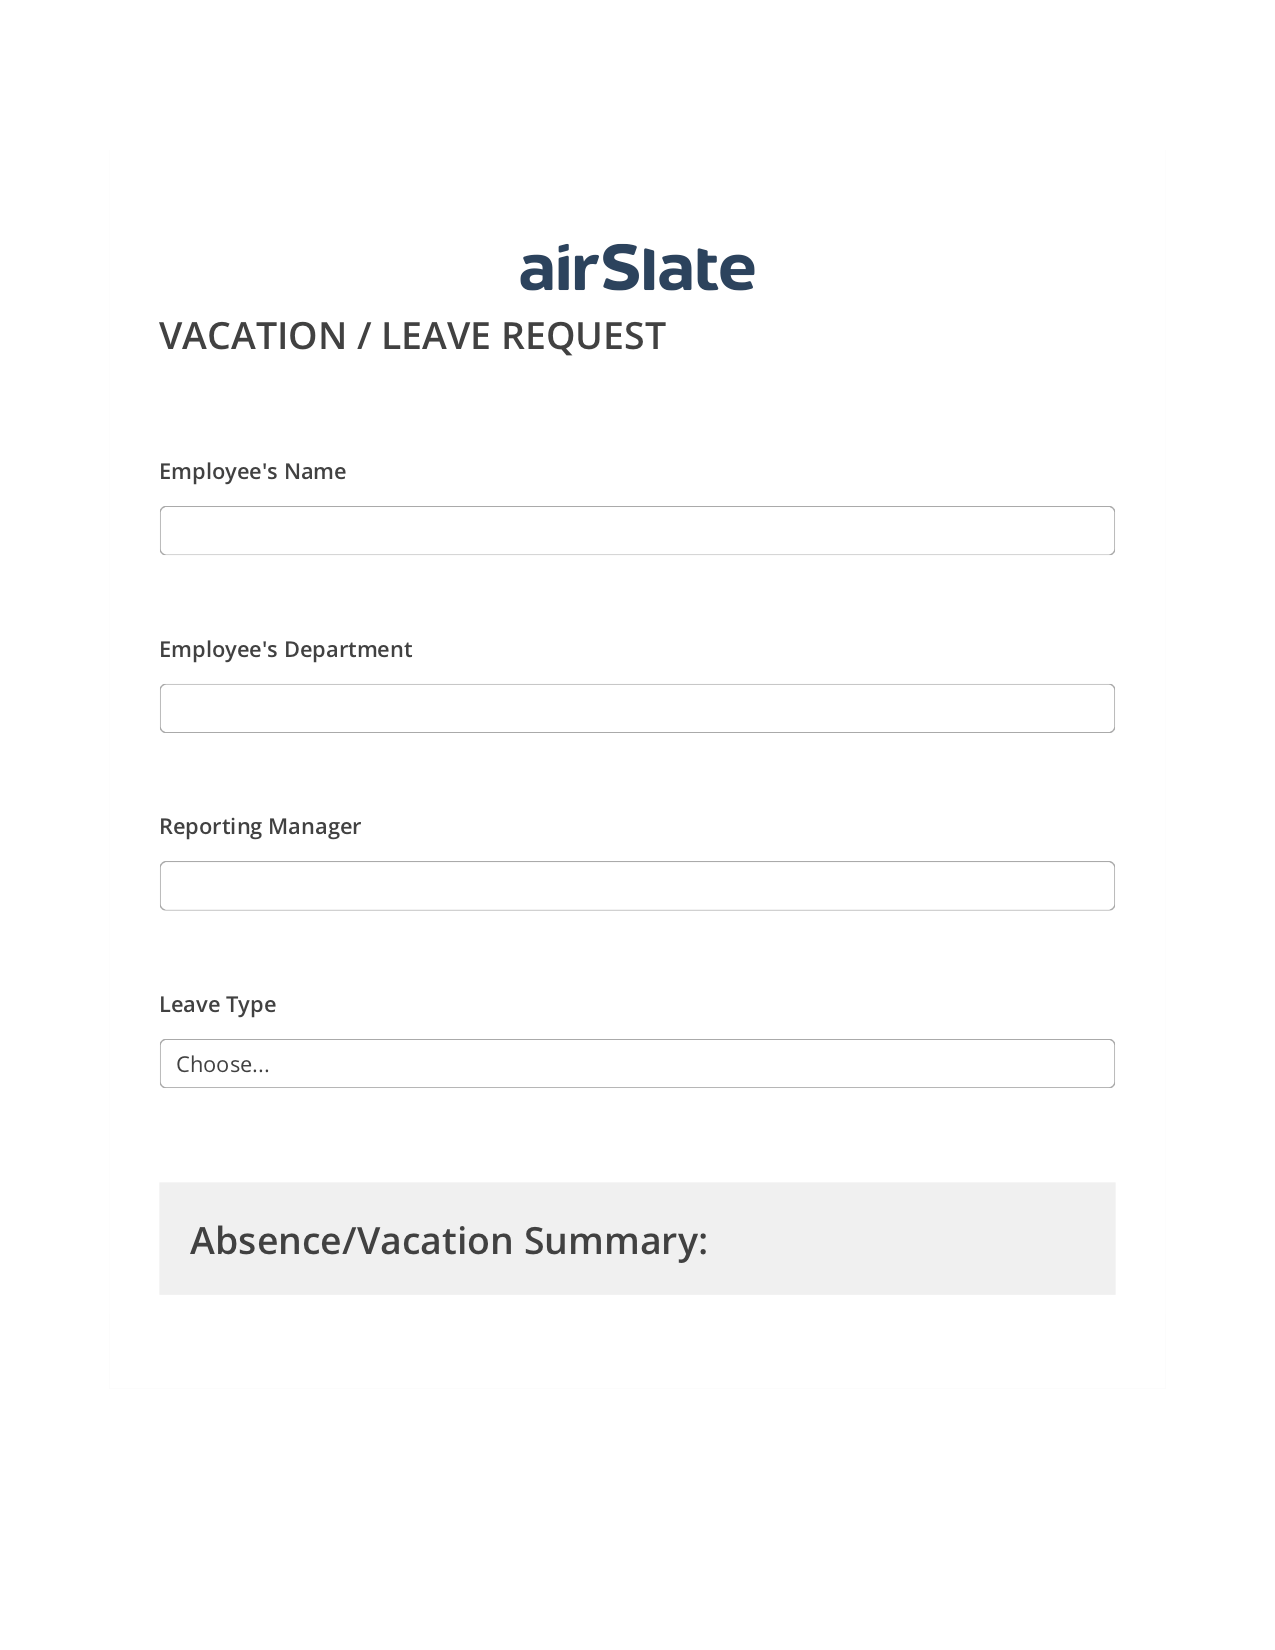 Vacation/Leave Request Workflow Pre-fill from MySQL Bot, Create slate addon, Archive to Google Drive Bot